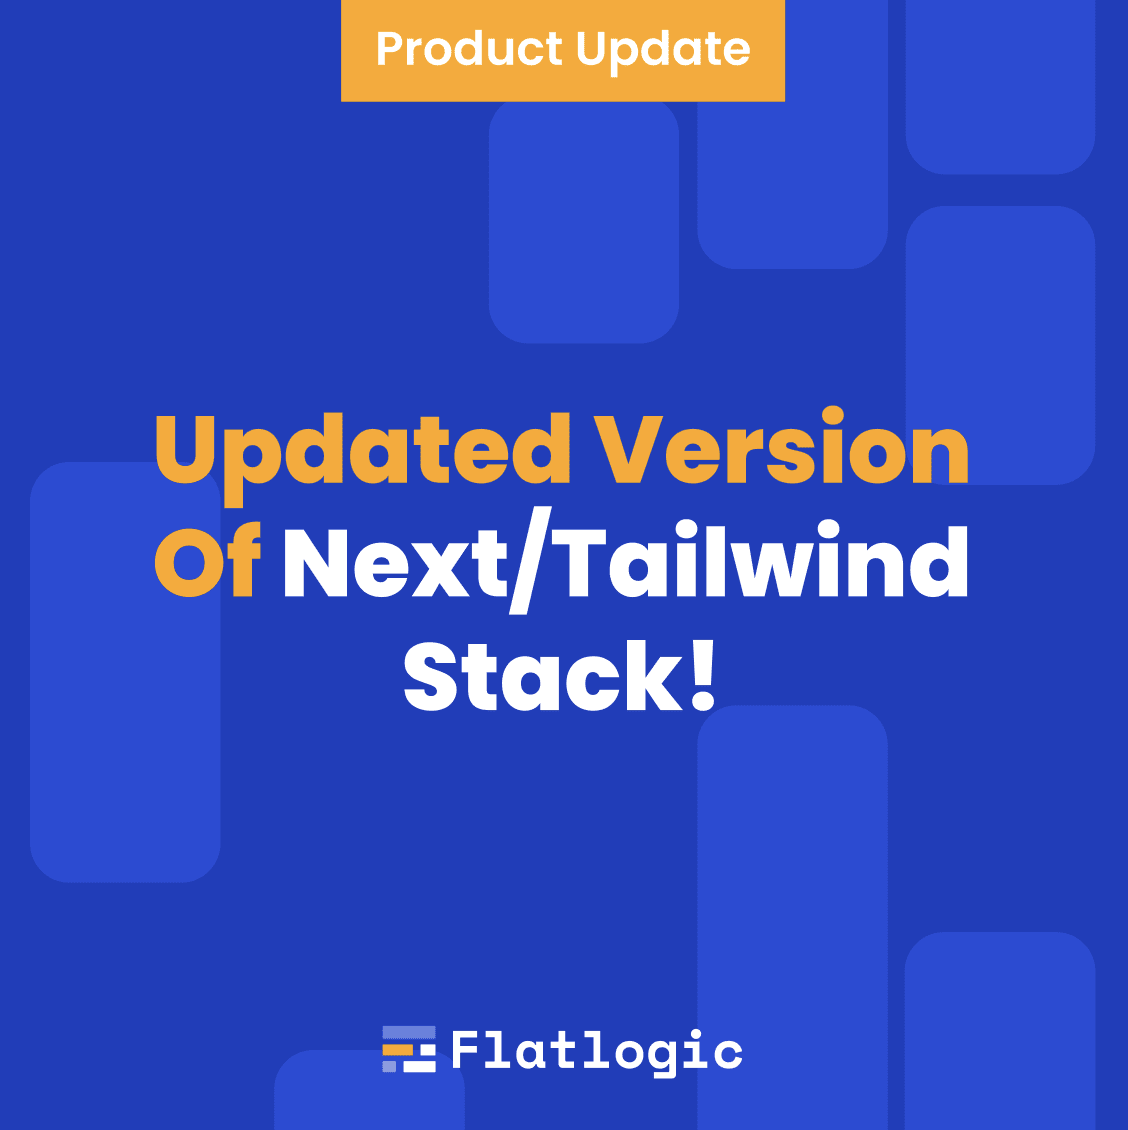 Updated Version Of Next/Tailwind Stack